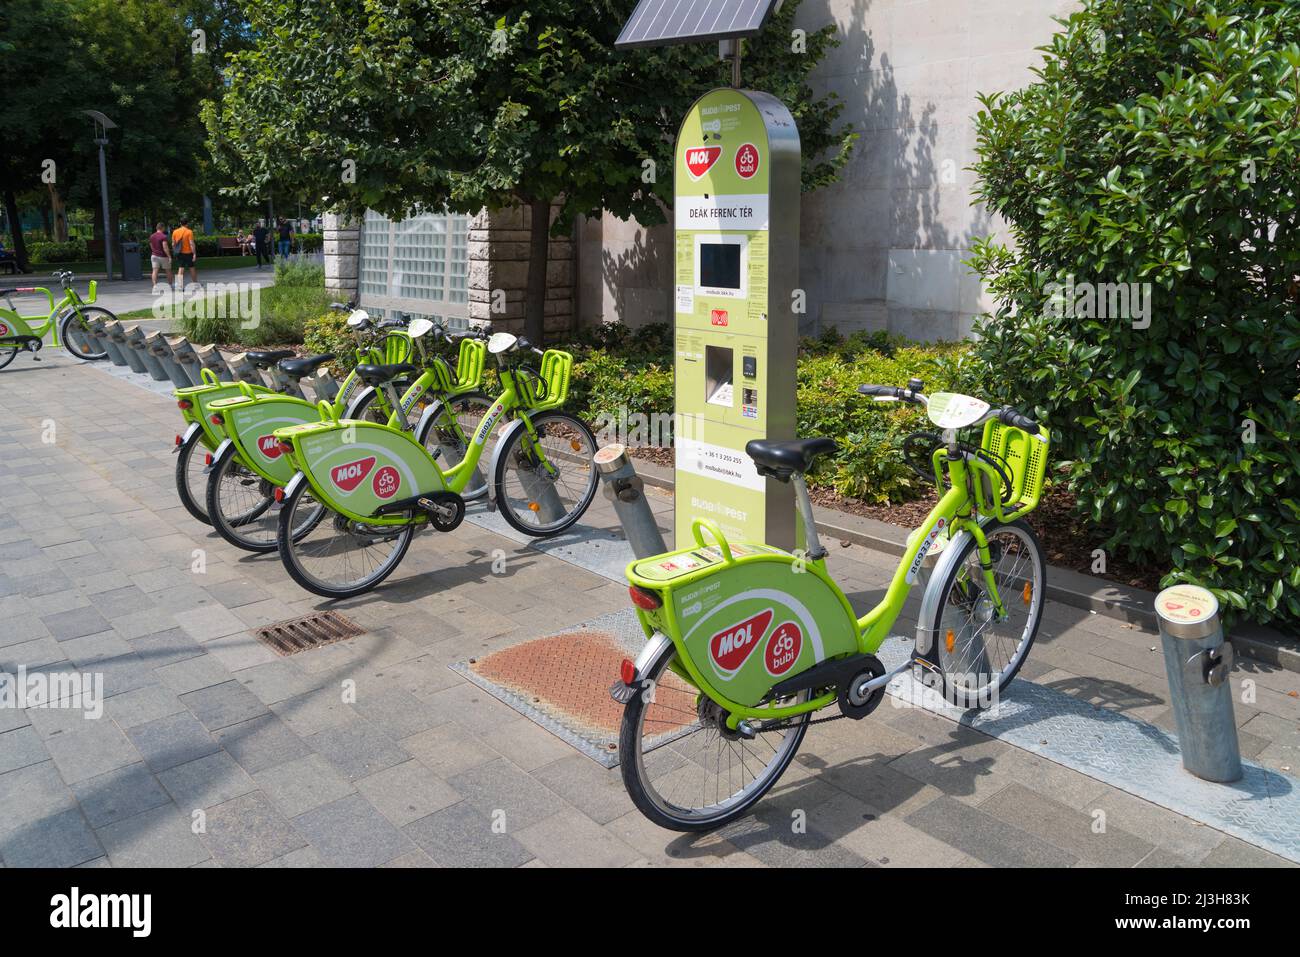 BUDAPEST, HUNGARY - JULY 29, 2020: Public green bikes for rental in the hungarian capital Stock Photo